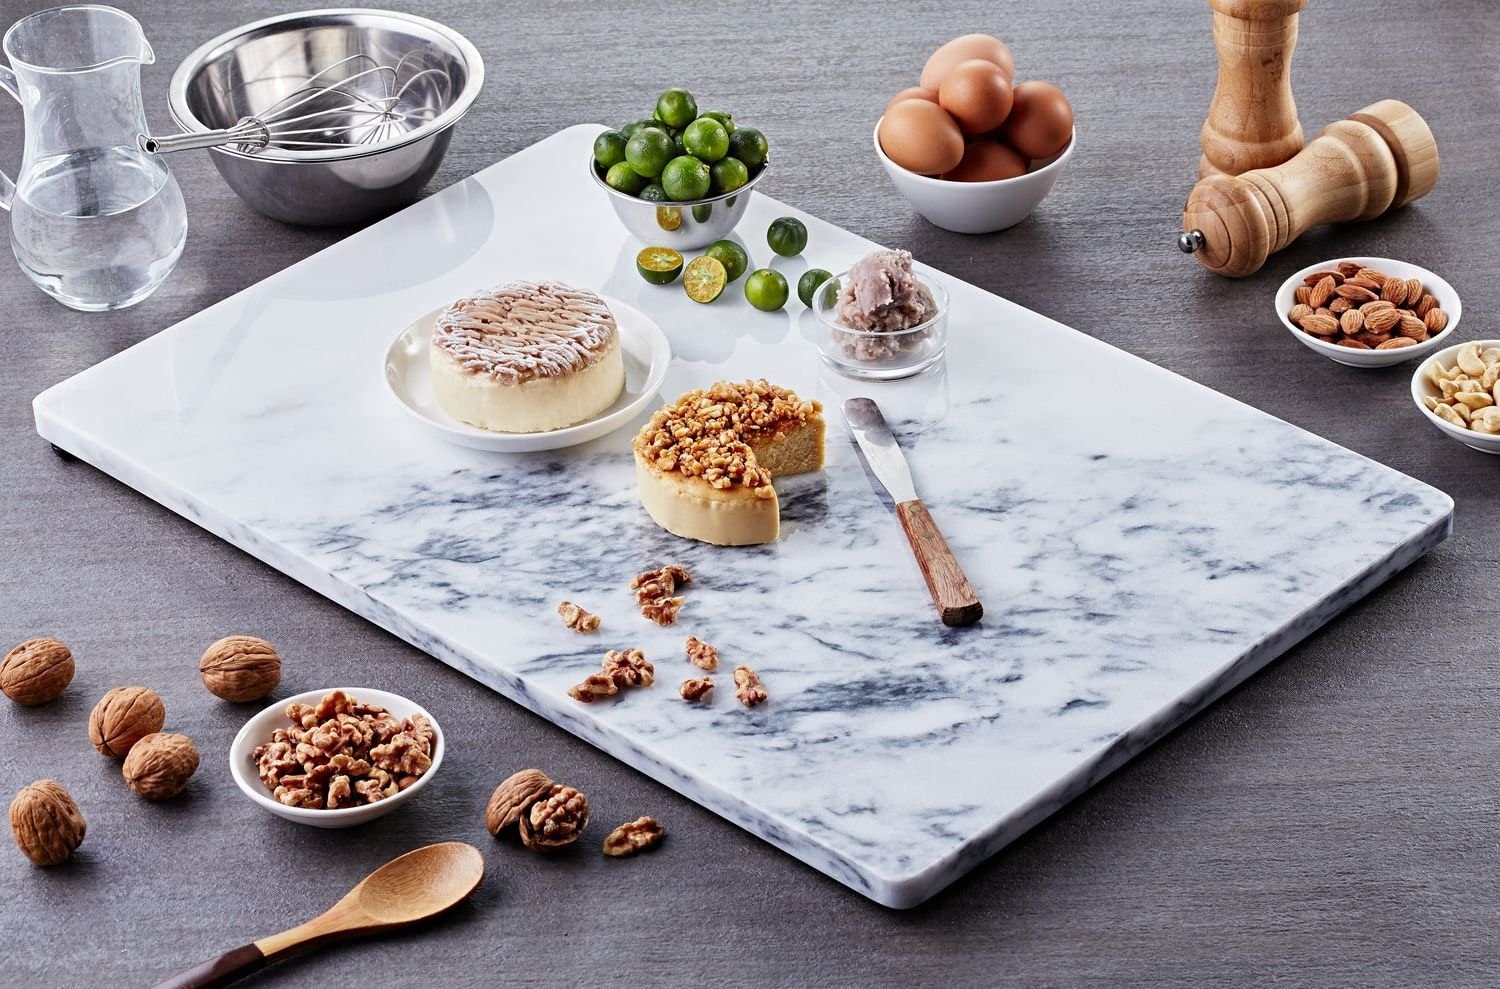 JEmarble Pastry Board 12x16 inch with Non-Slip Rubber Feets for Stability Perfect for Keep the Dough Cool and Chocolate